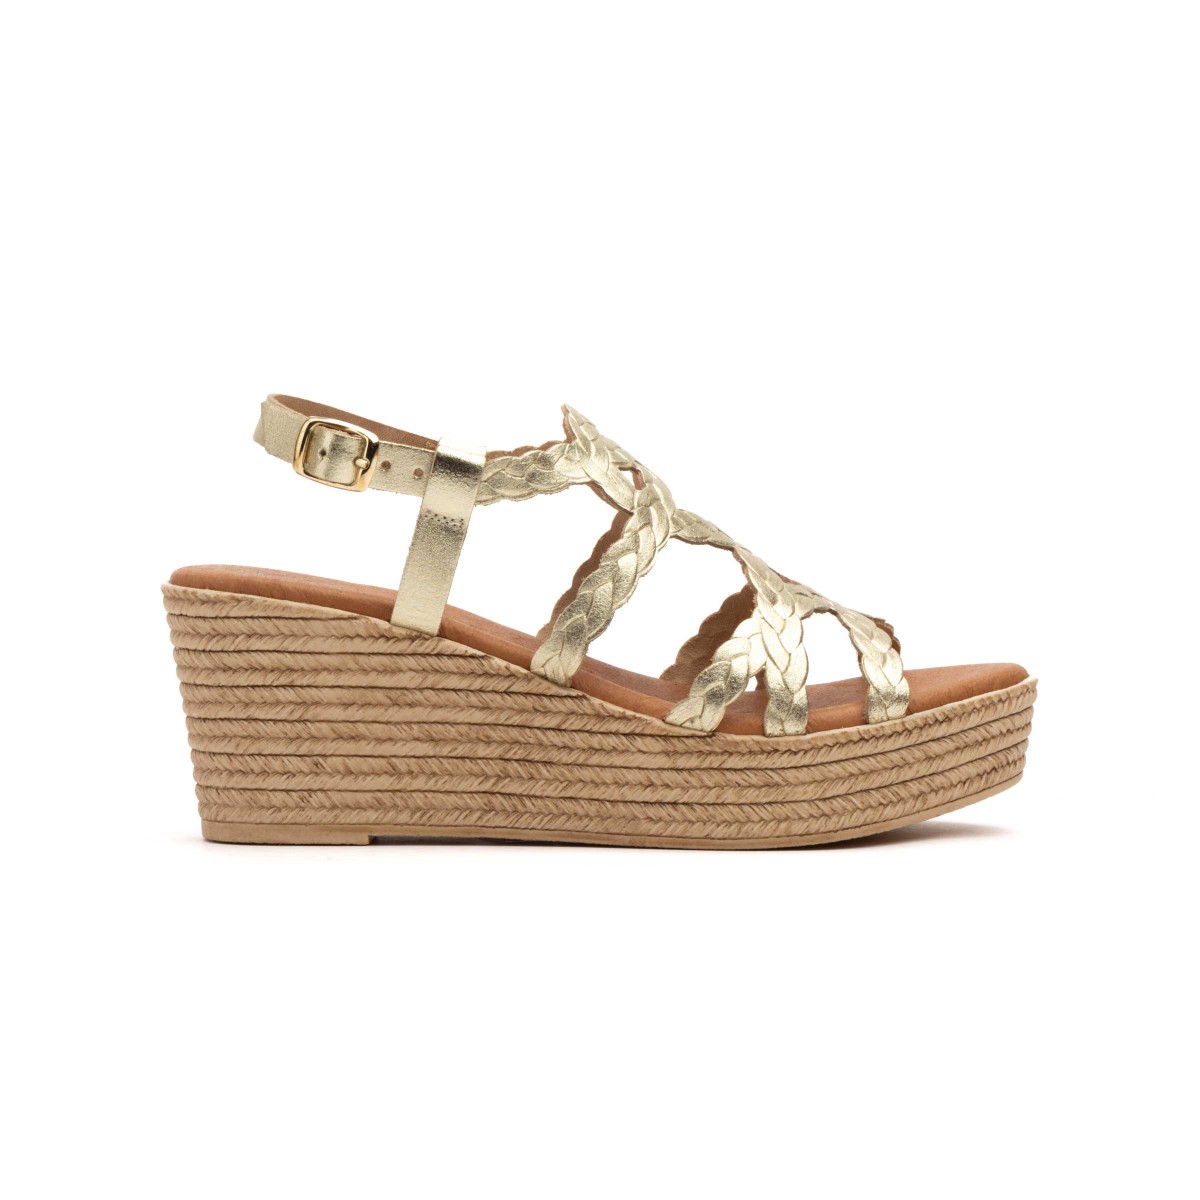 Gold leather wedge sandals by DSD